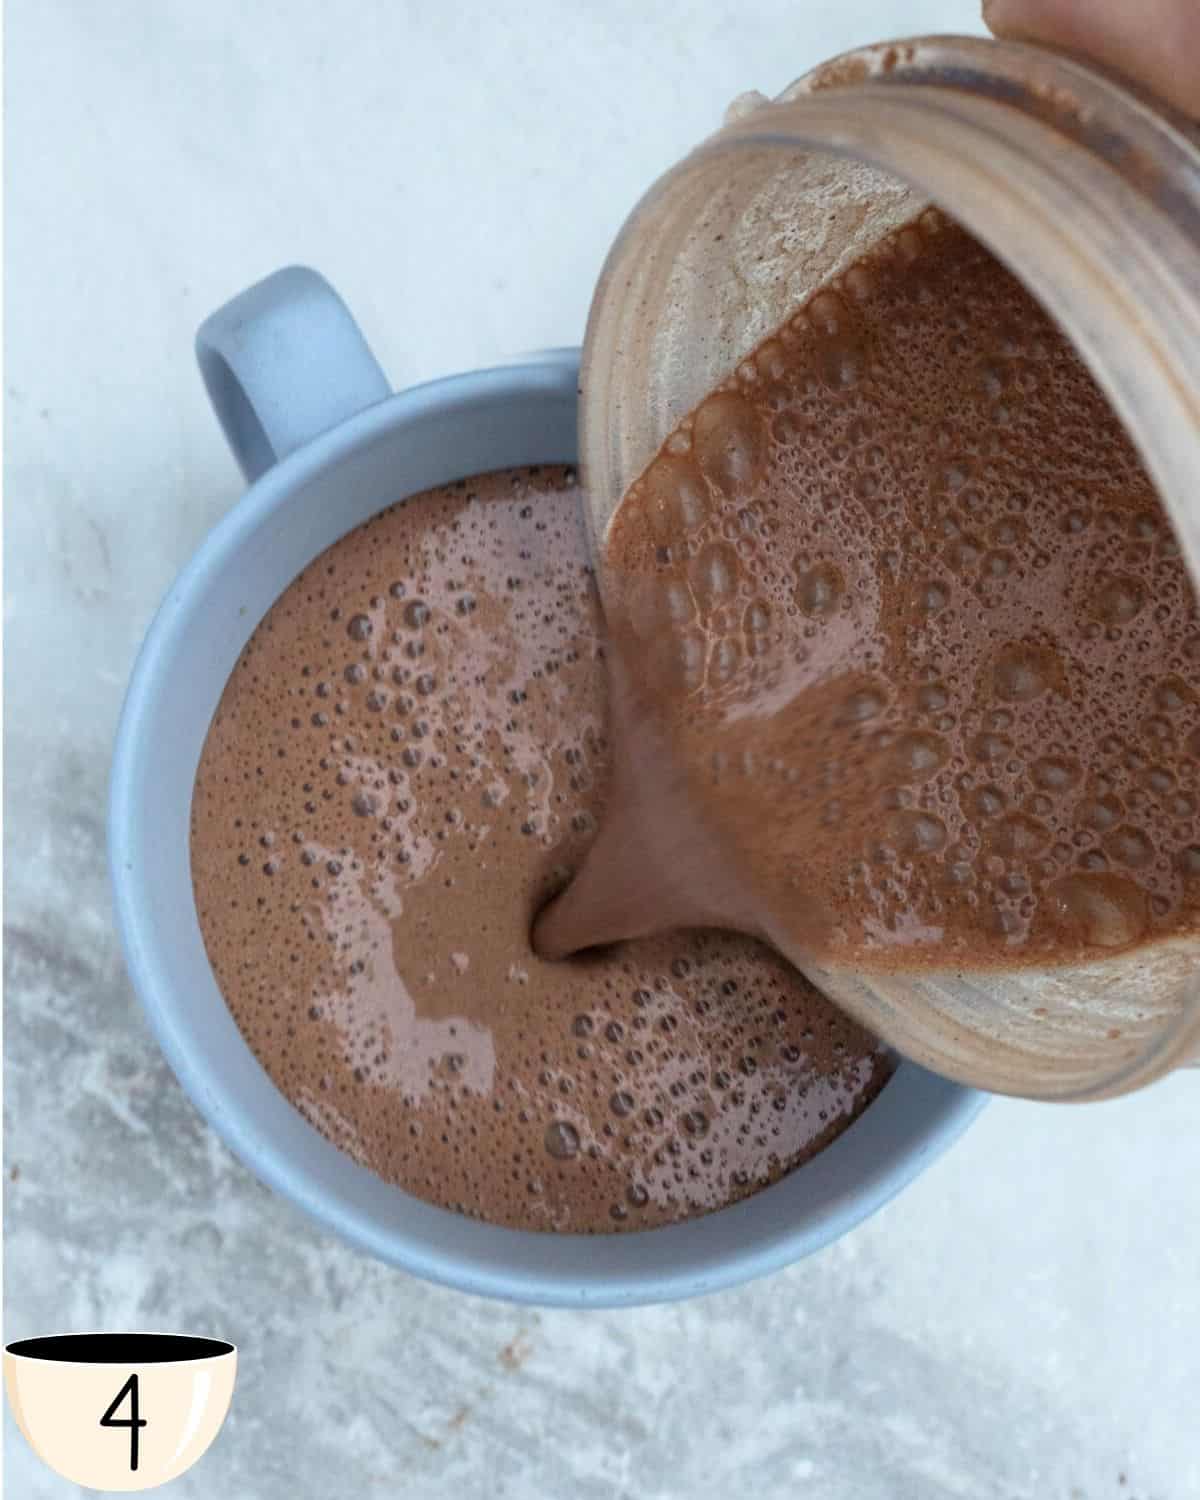 Hot chocolate with protein being poured into a mug ready to drink. The warm beverage is creamy and smooth.